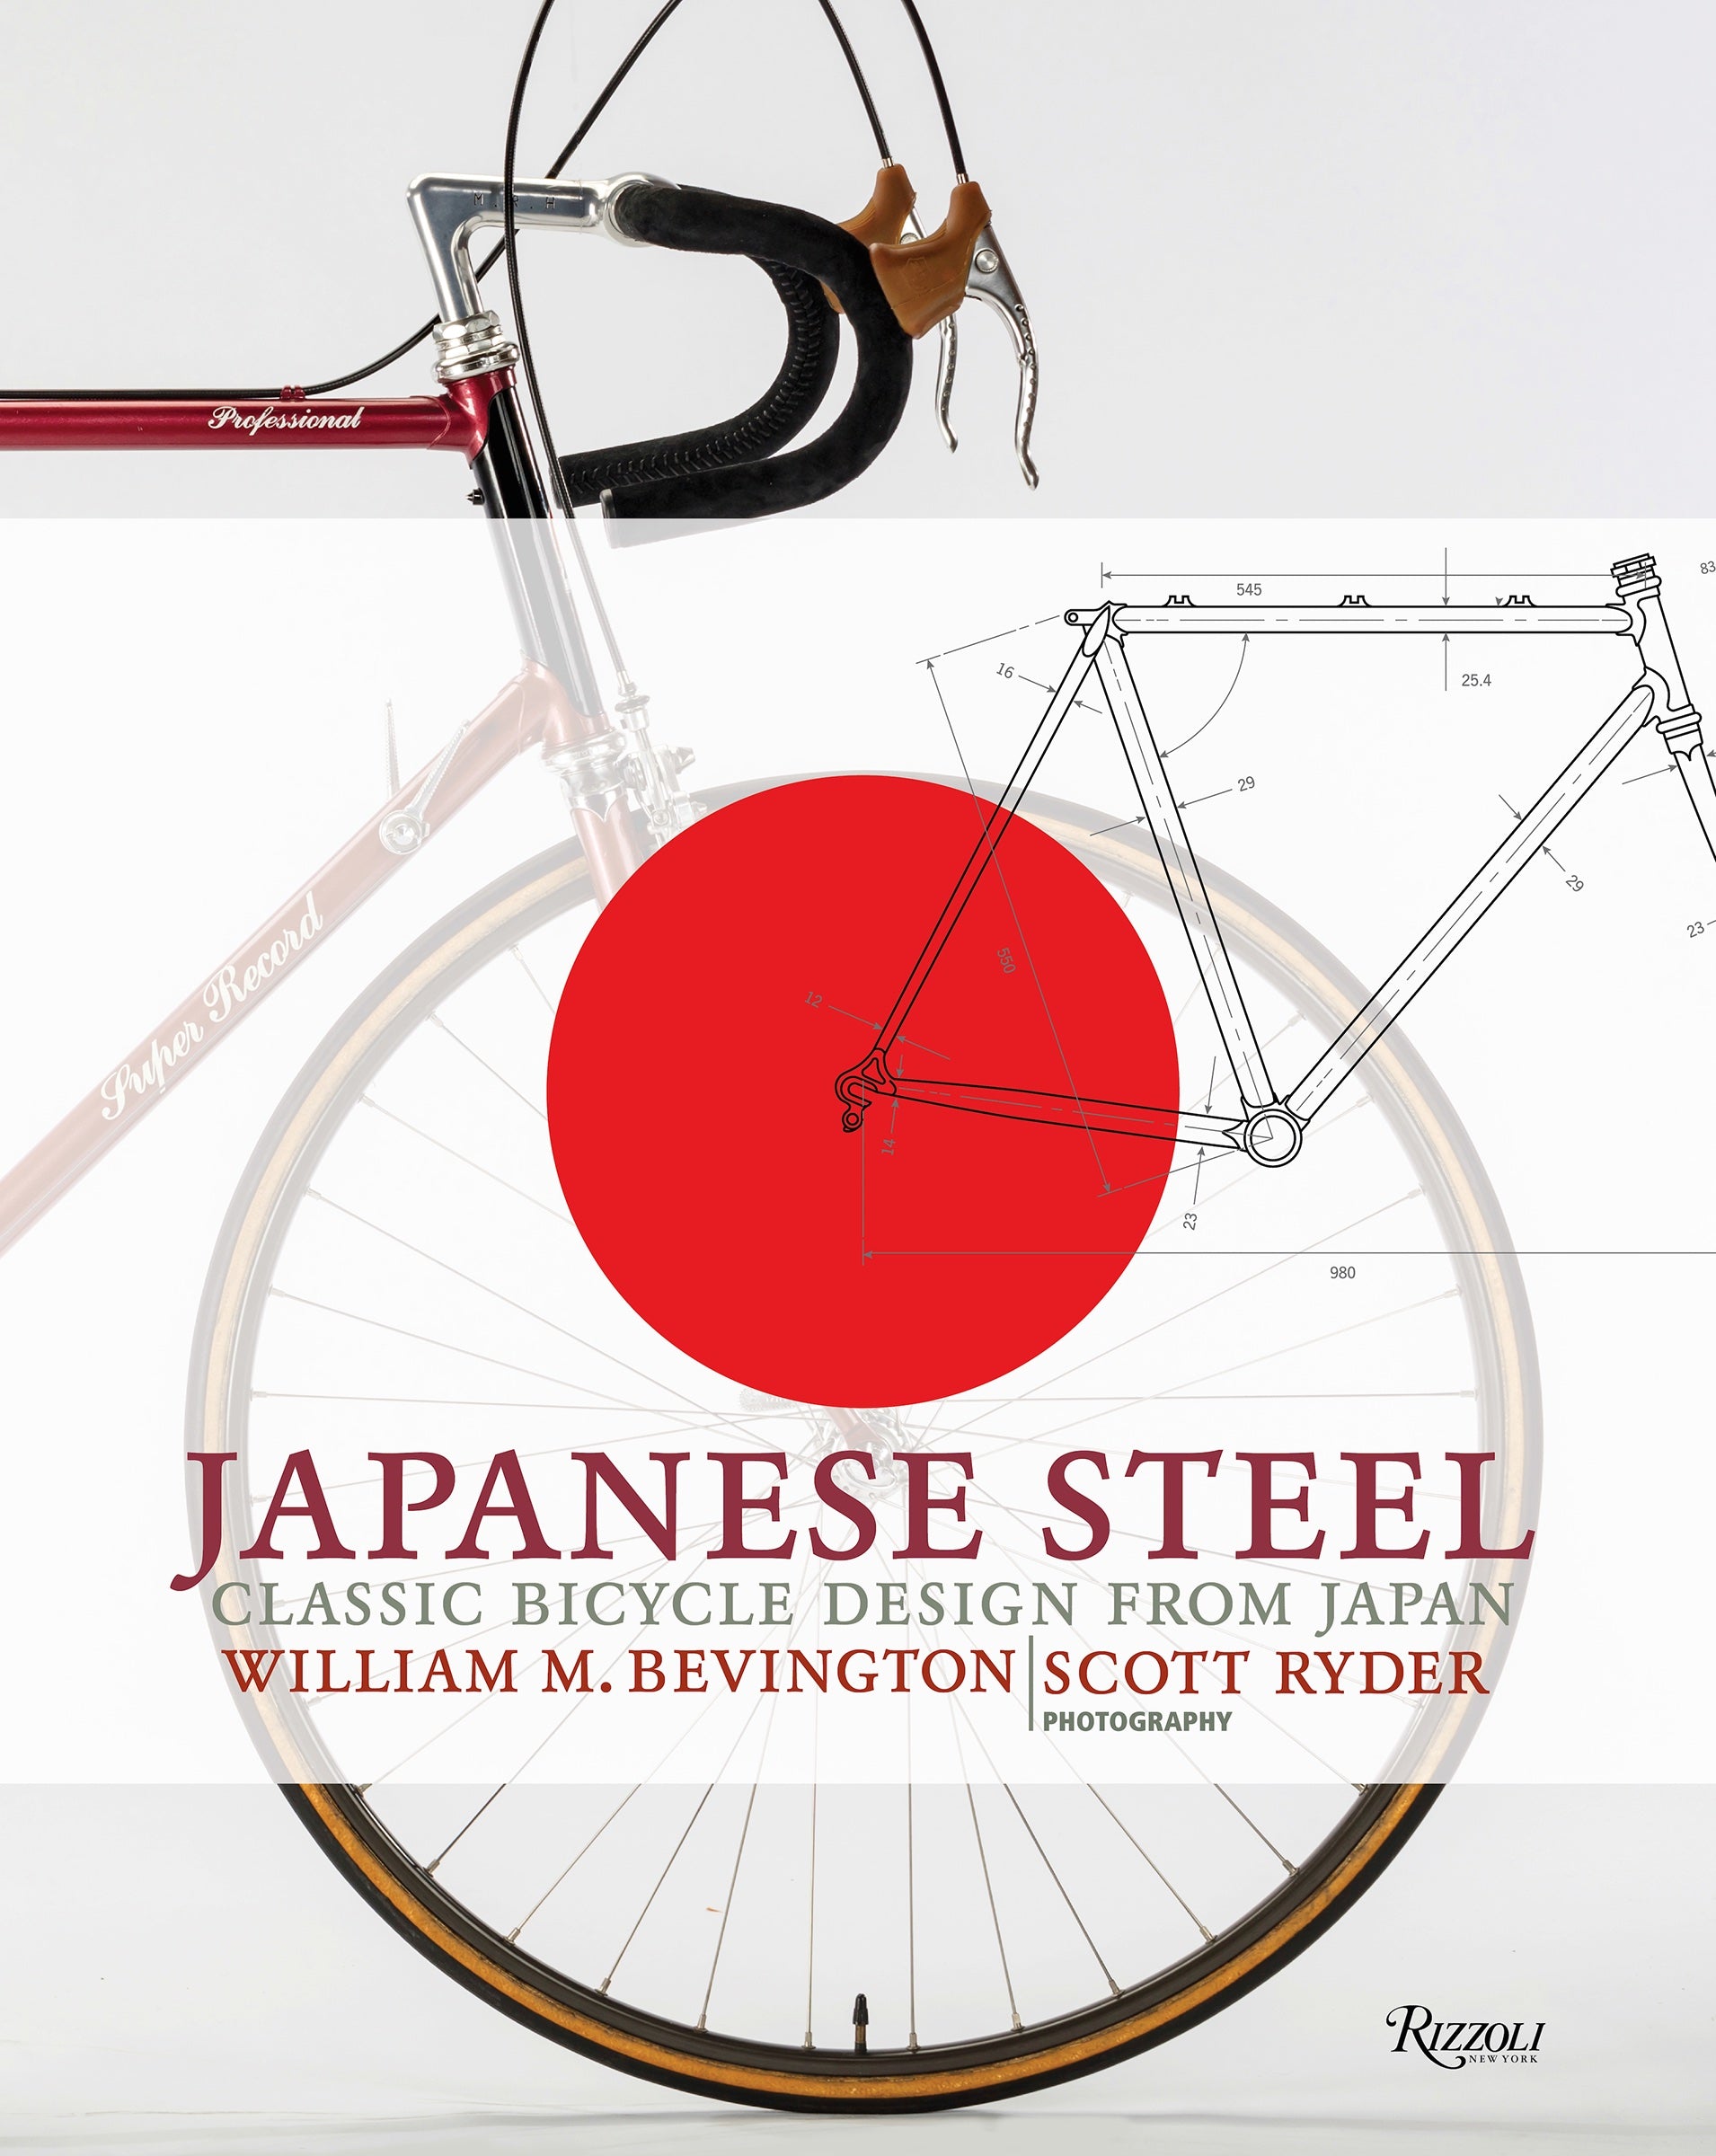 JAPANESE STEEL : CLASSIC BICYCLE DESIGN FROM JAPAN